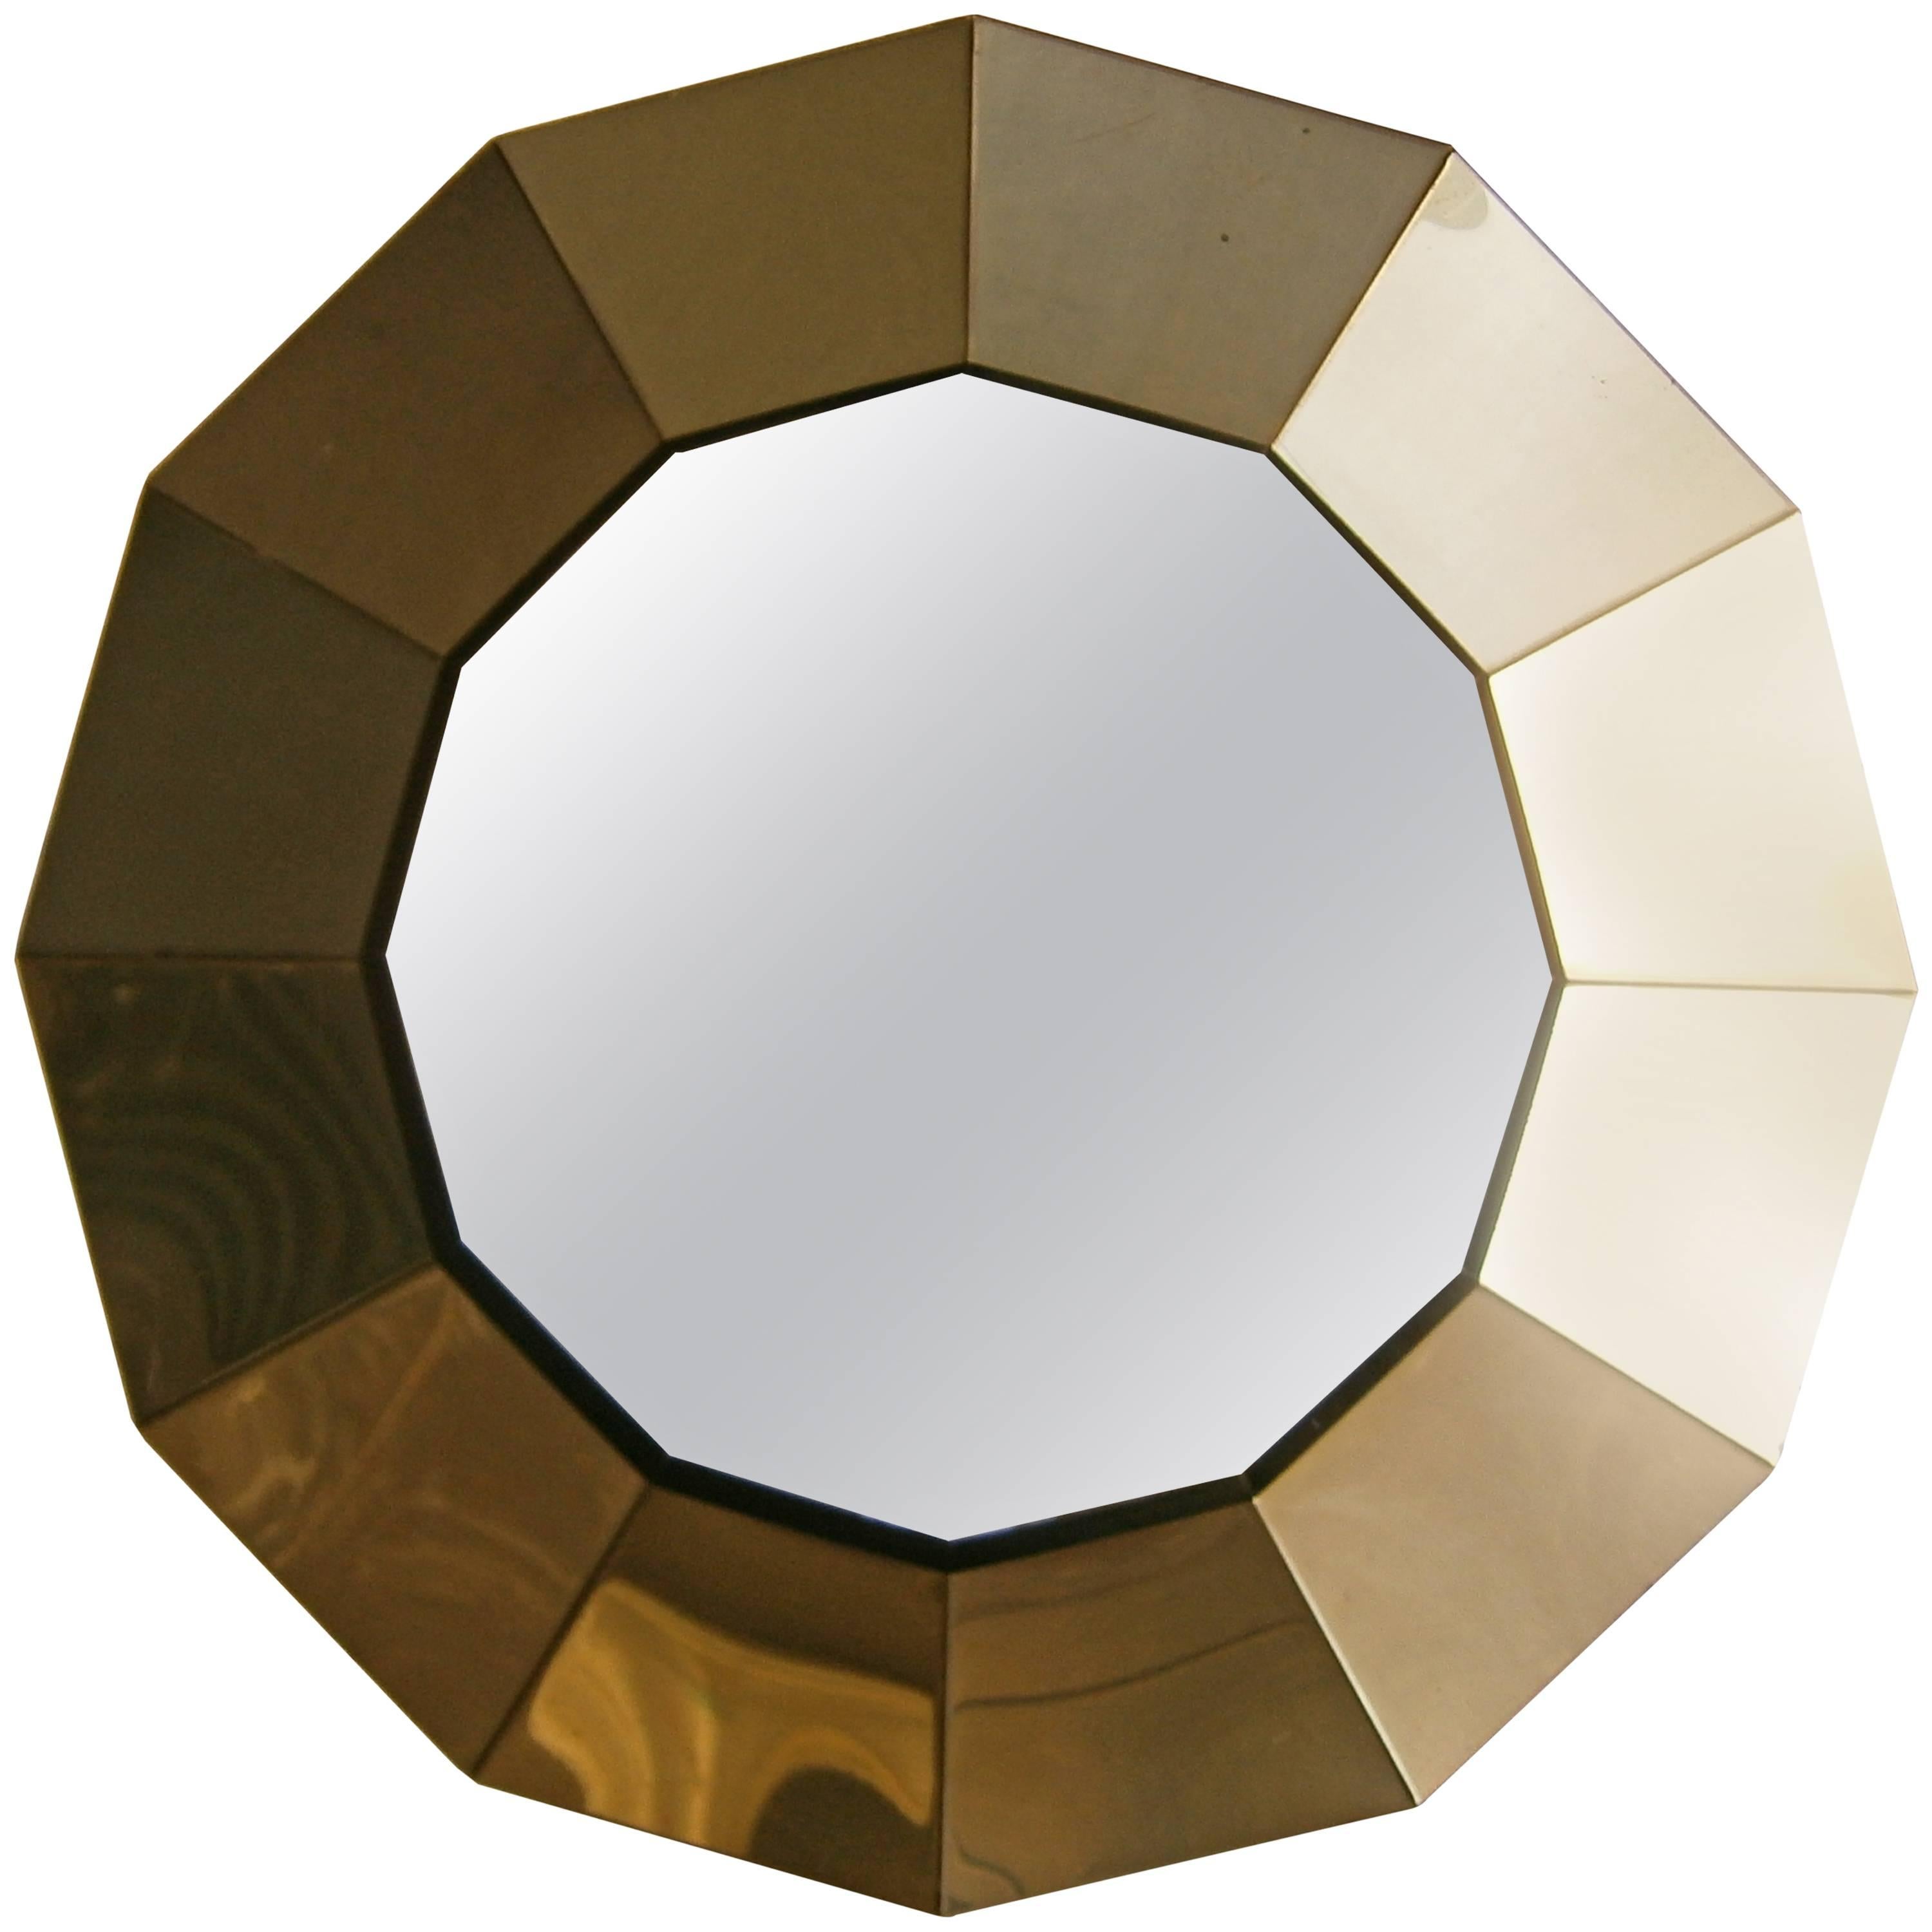 Spectacular 12 Sided Brass Mirror by Curtis Jere, circa 1970's For Sale